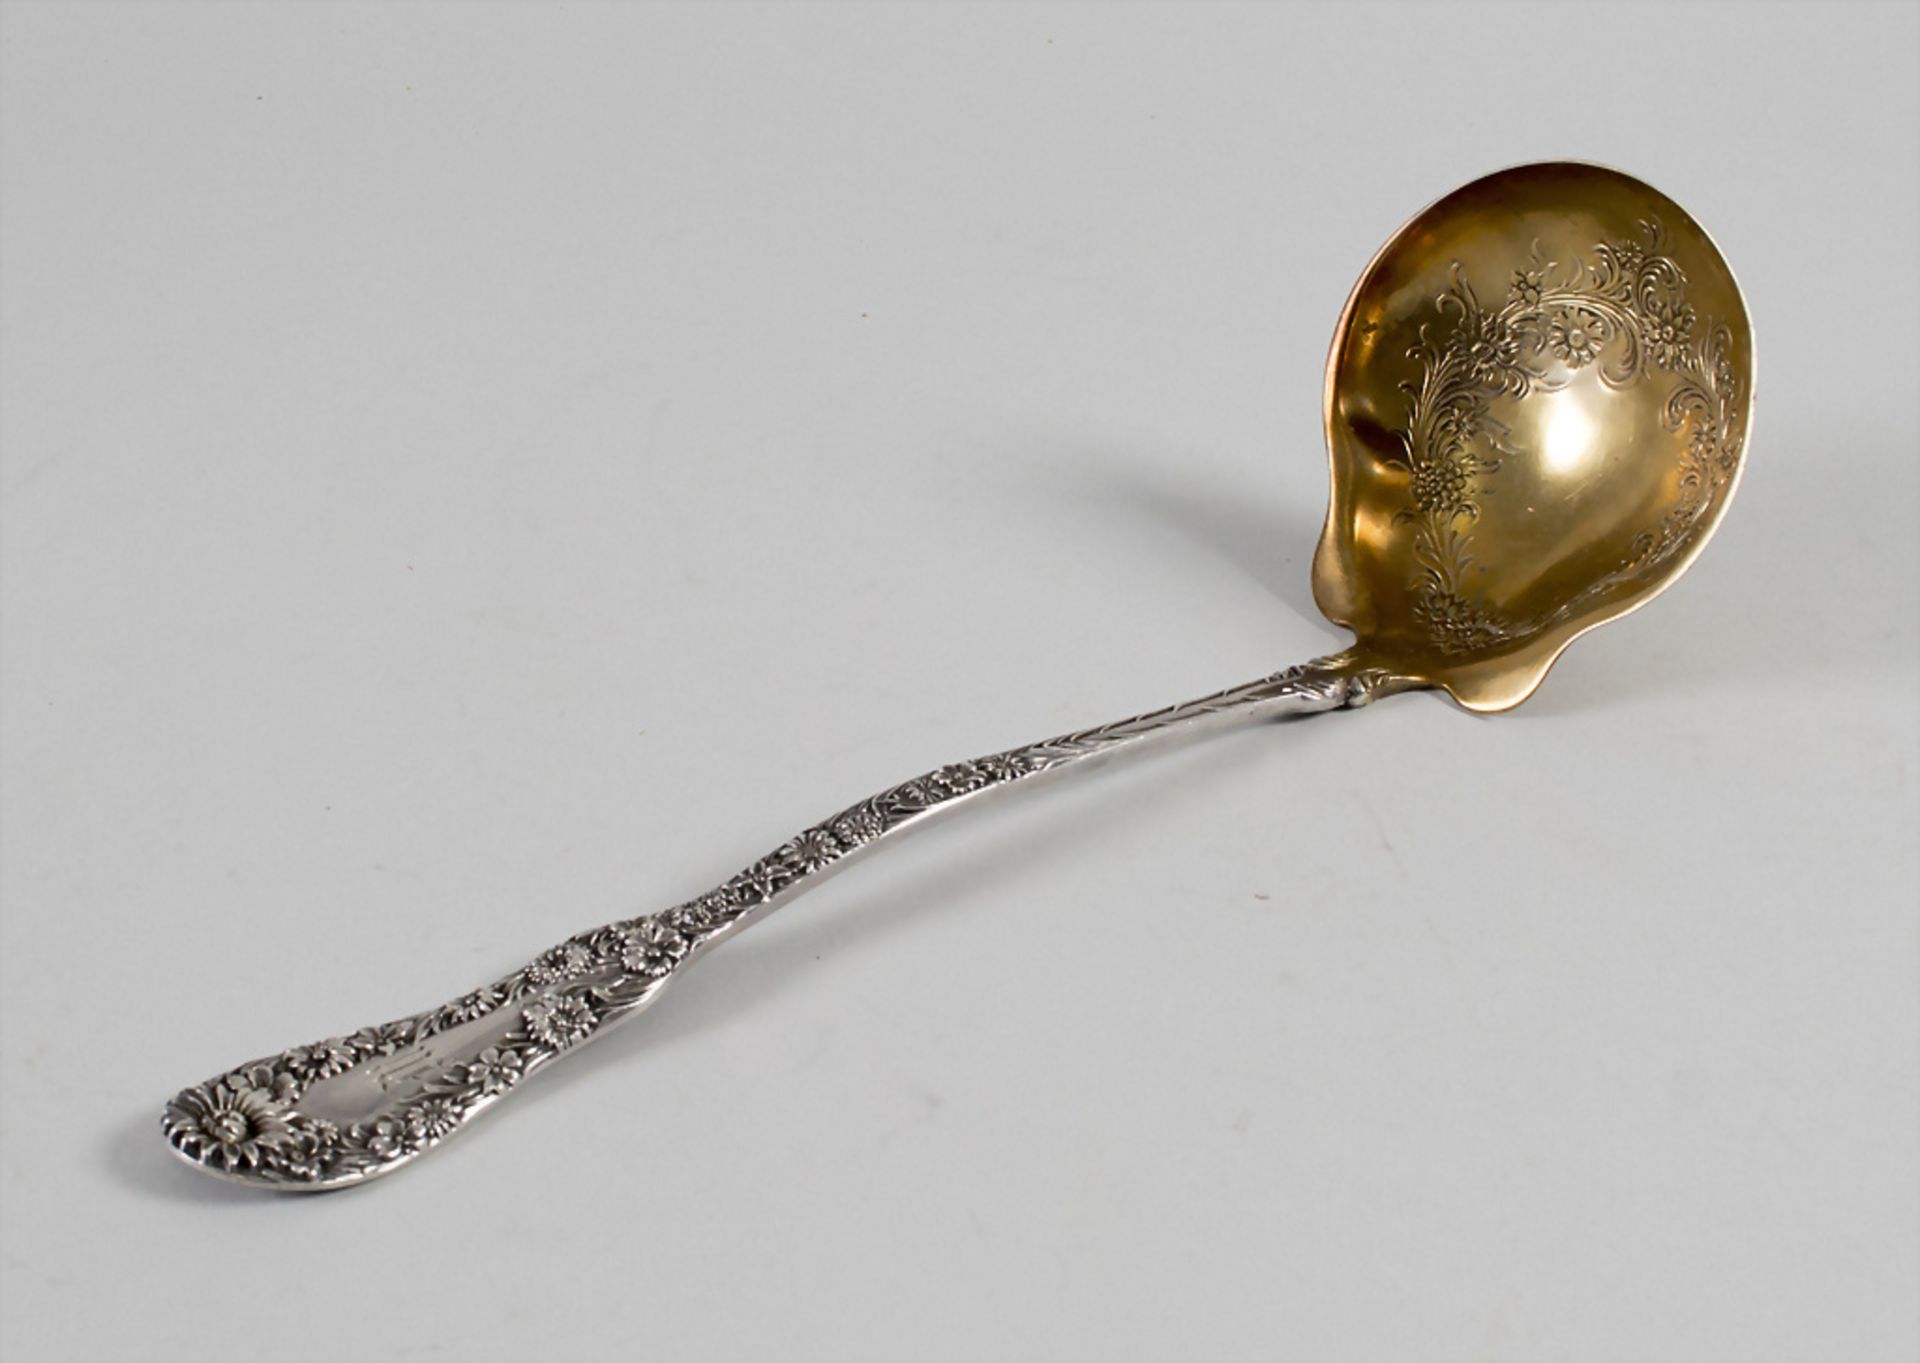 Suppenkelle 'No. 10' / A silver blossom soup ladle 'No. 10', Dominick & Haff, New York, um 1896